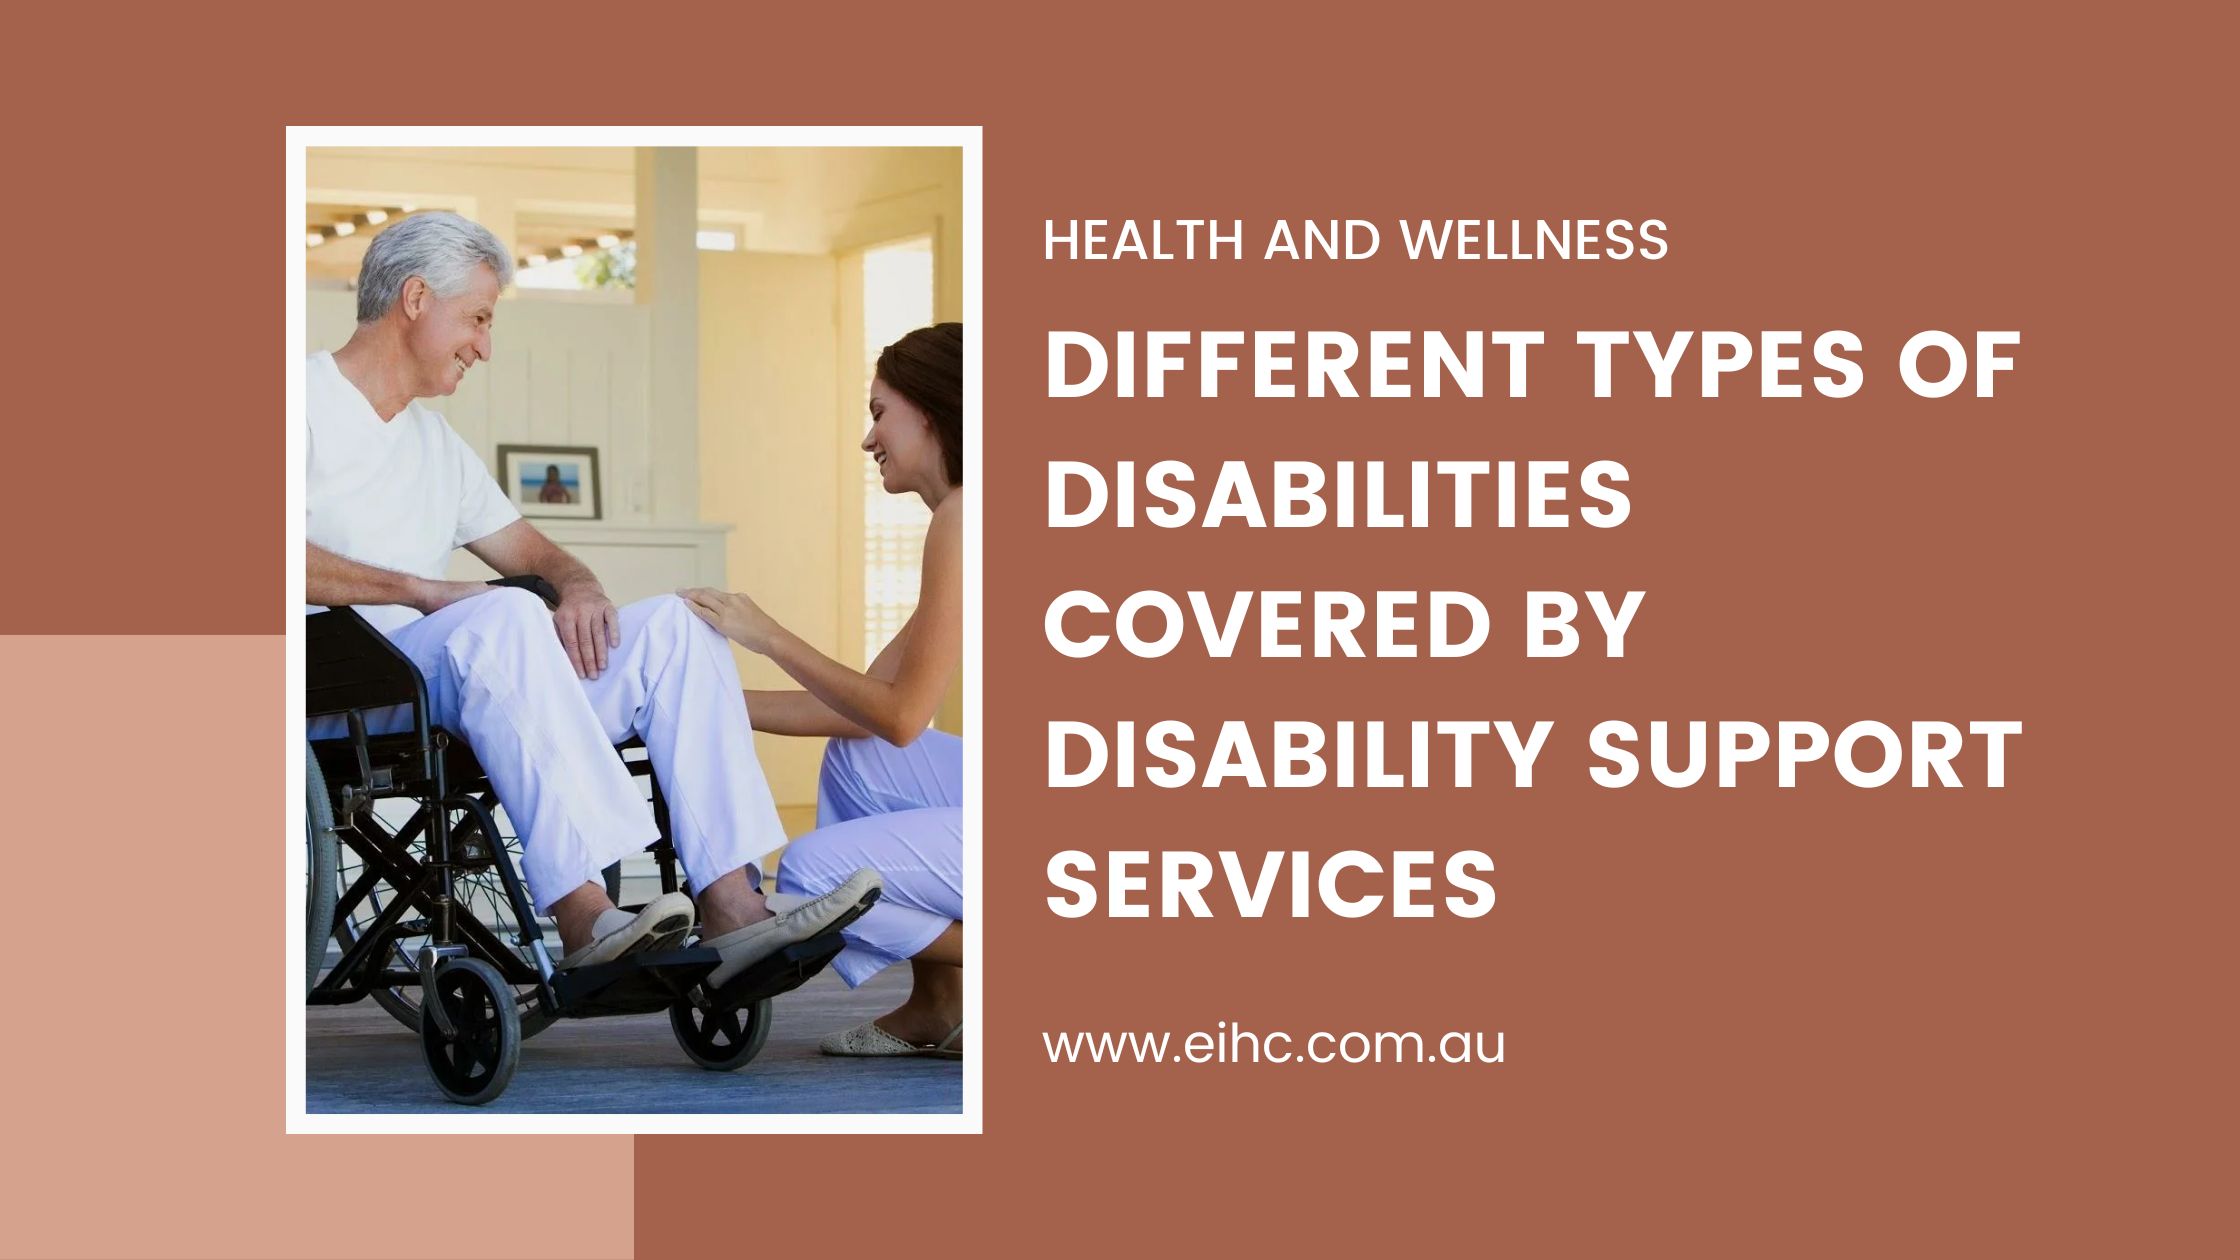 Different Types of Disabilities Covered by Disability Support Services